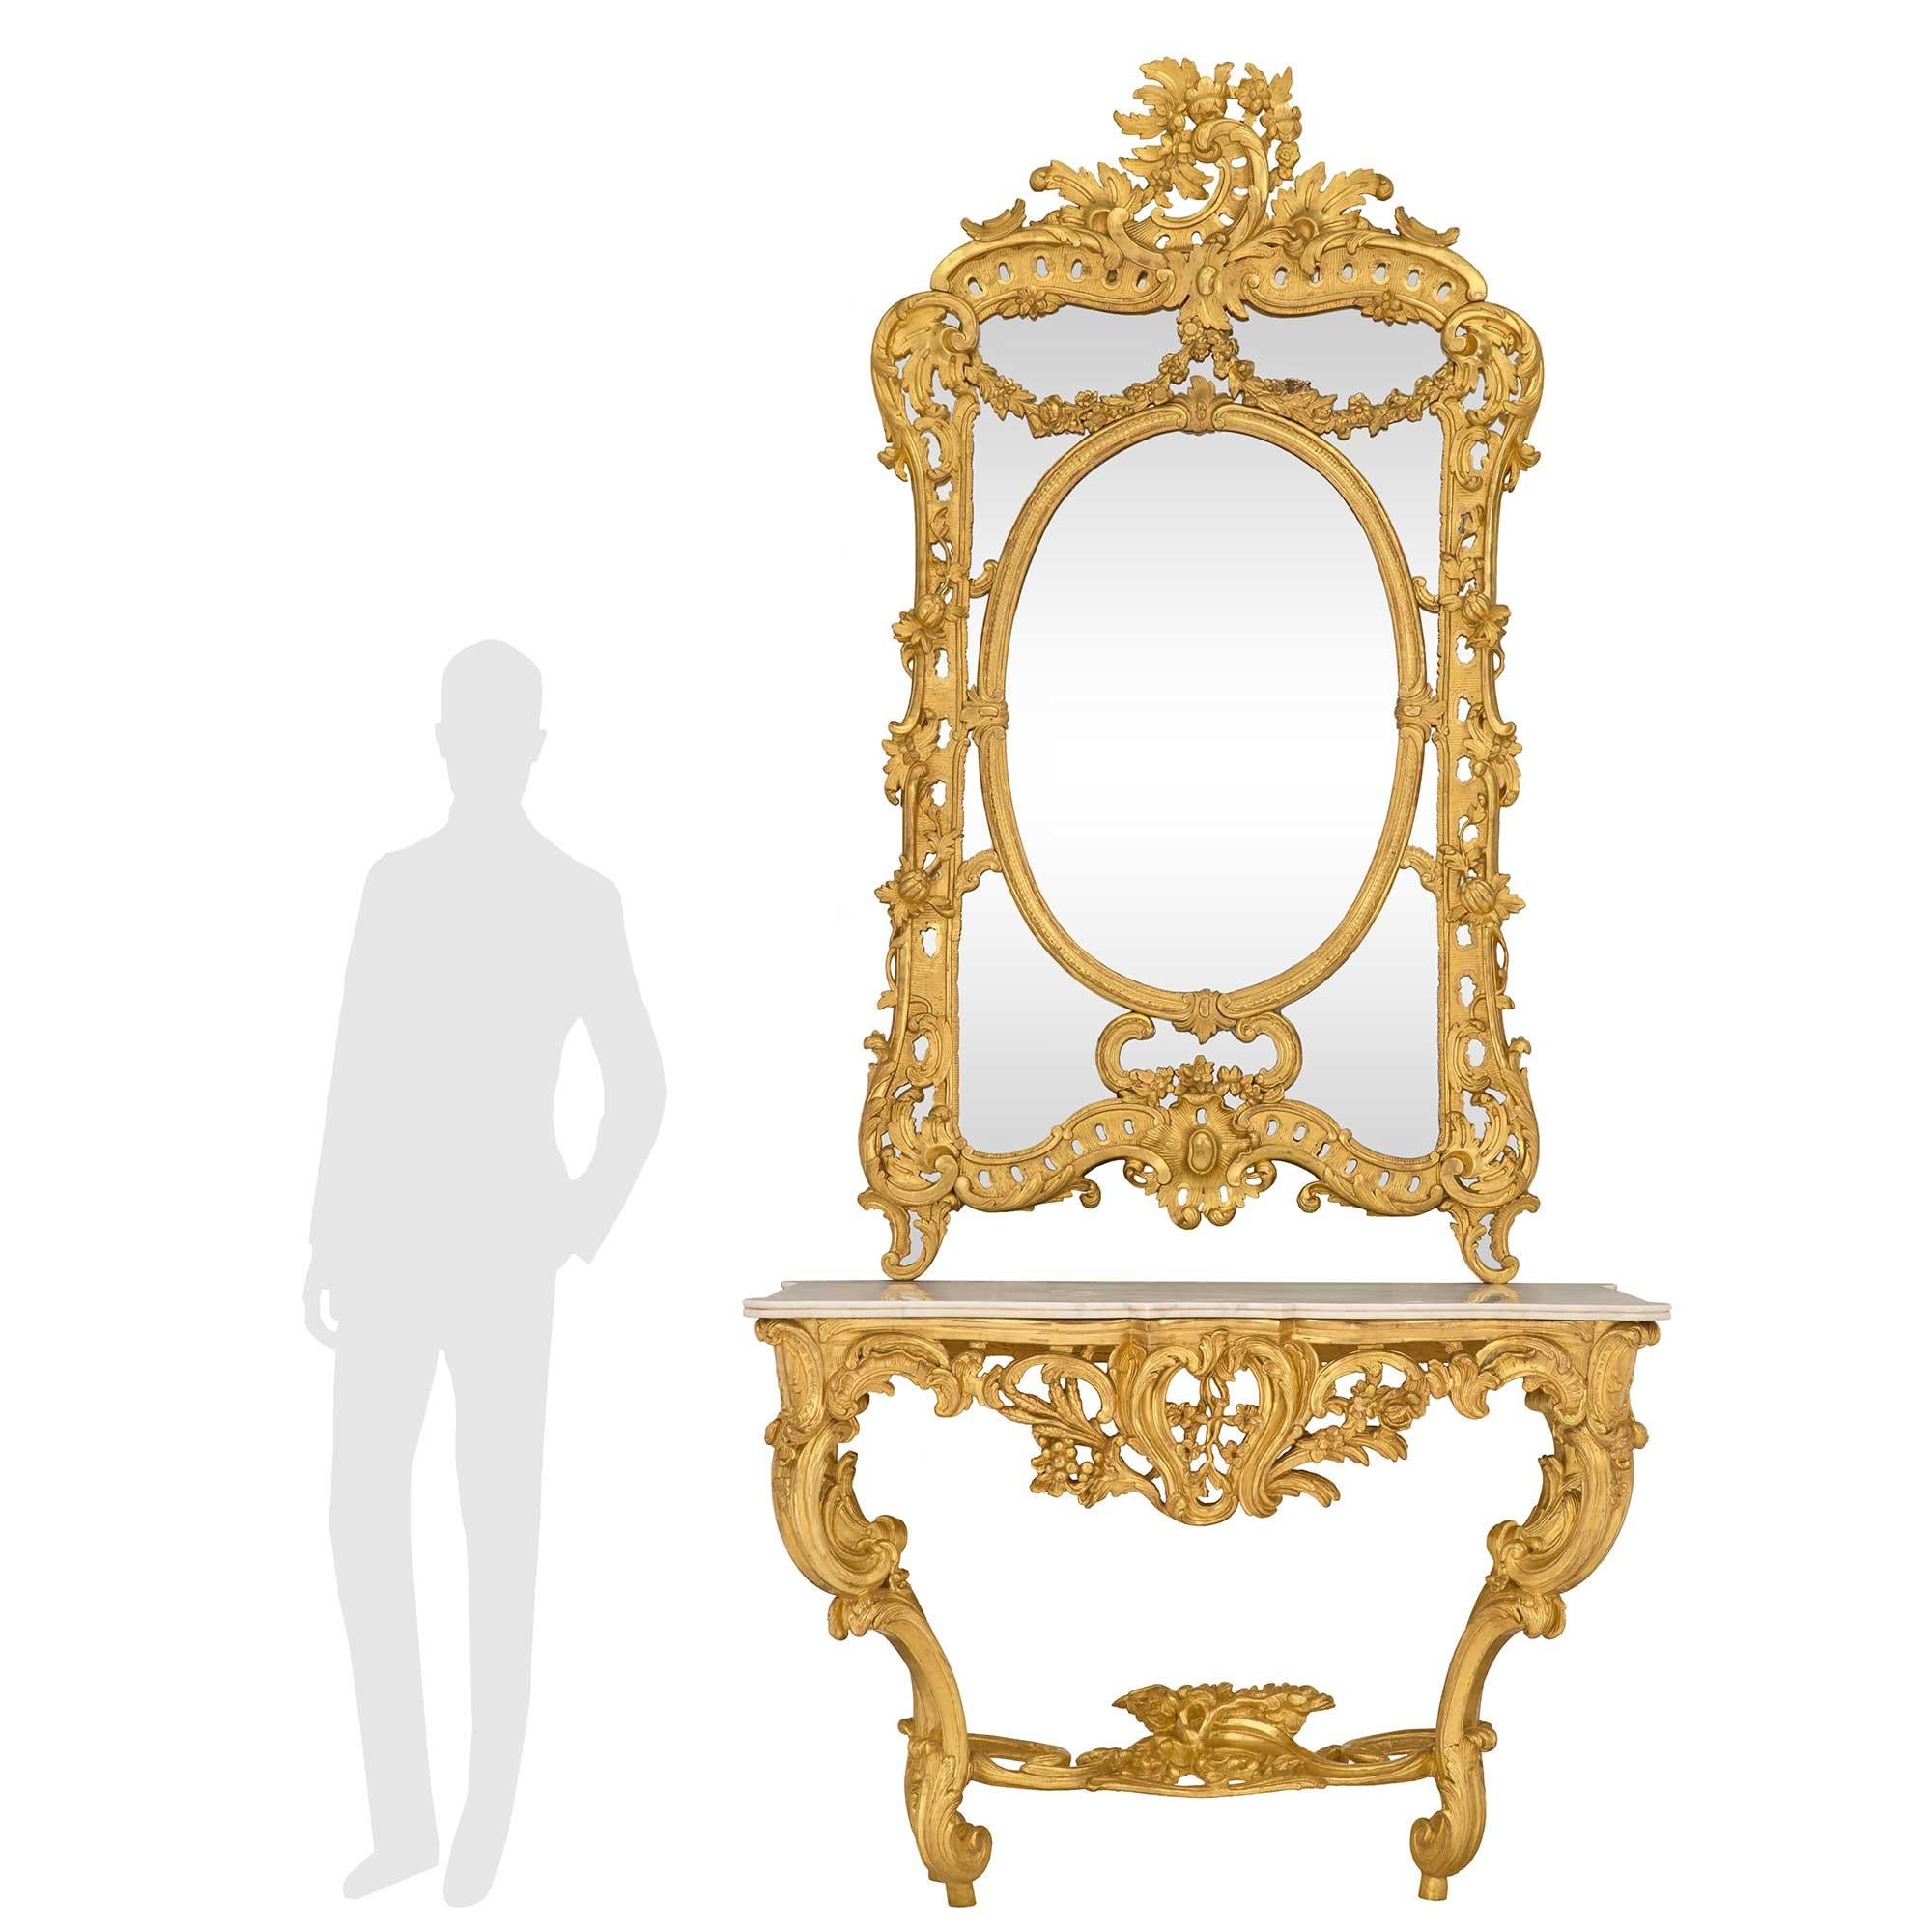 A monumental and most impressive French early 19th century Louis XV st. giltwood and white Carrara marble console and matching mirror. The stunning wall mounted console is raised by outstanding cabriole legs with richly carved acanthus leaves and